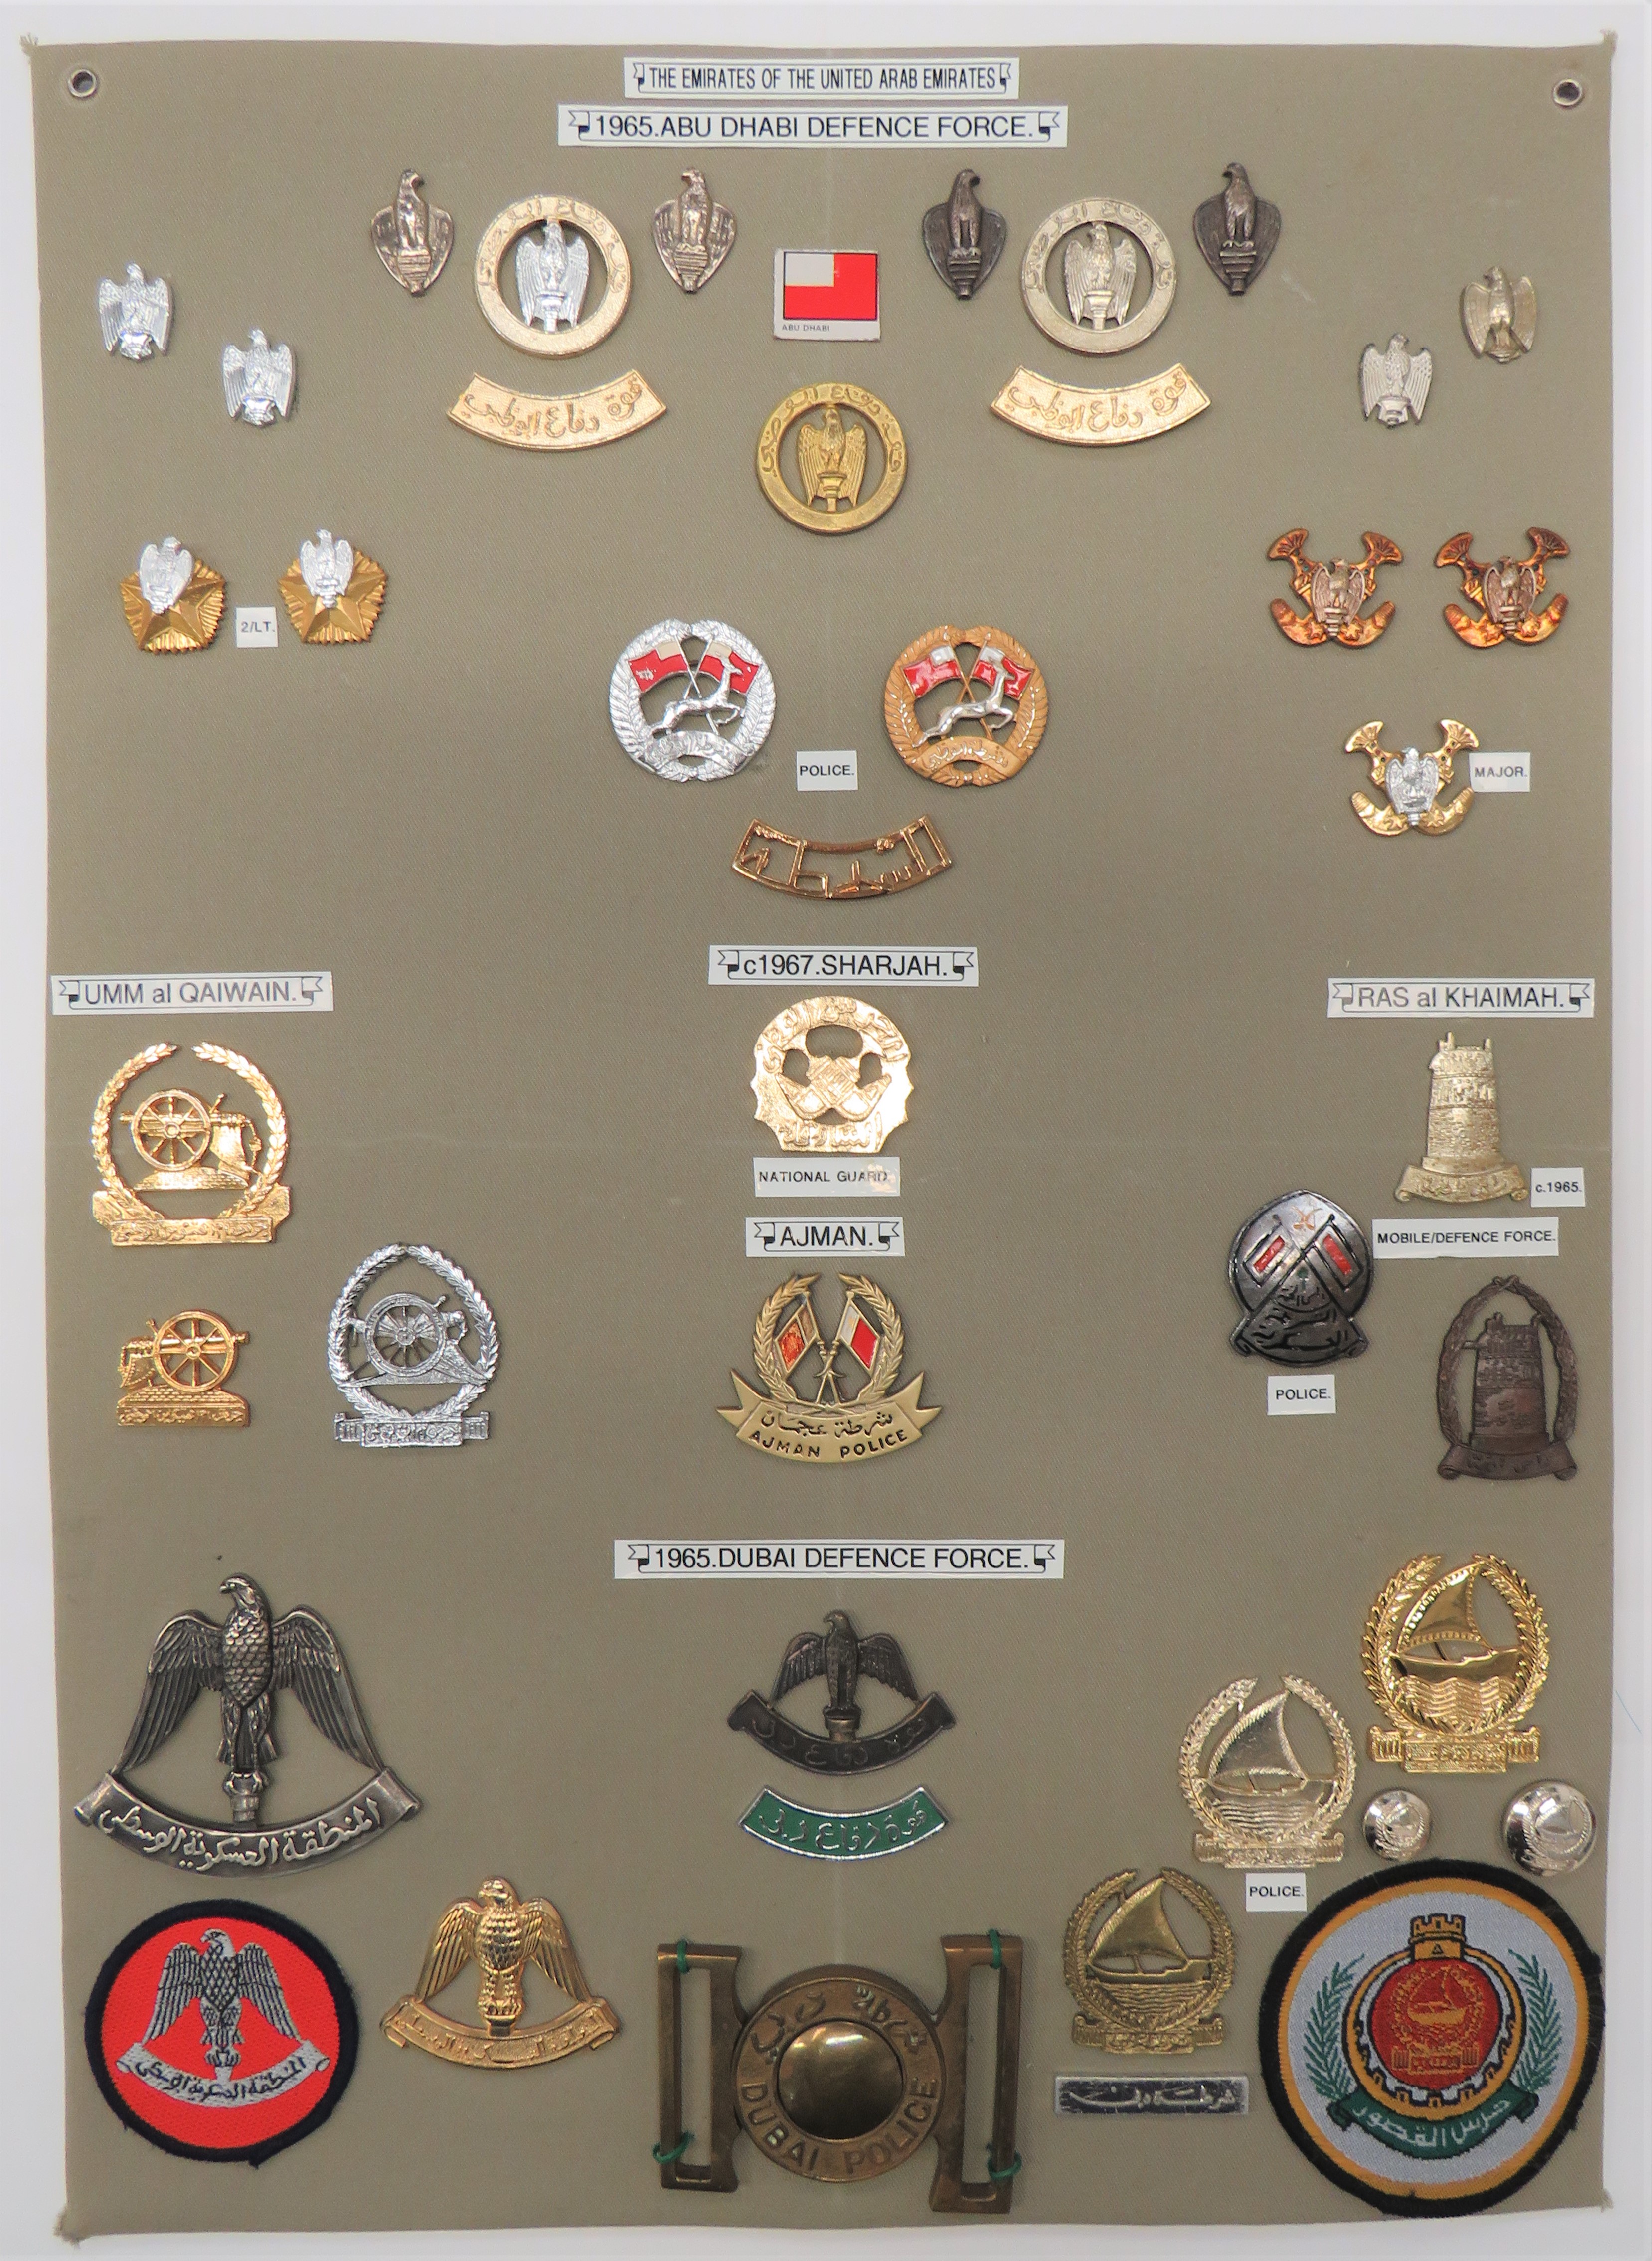 39 Items Of Insignia For Abu Dhabi Defence Force display board with good tabulated display of